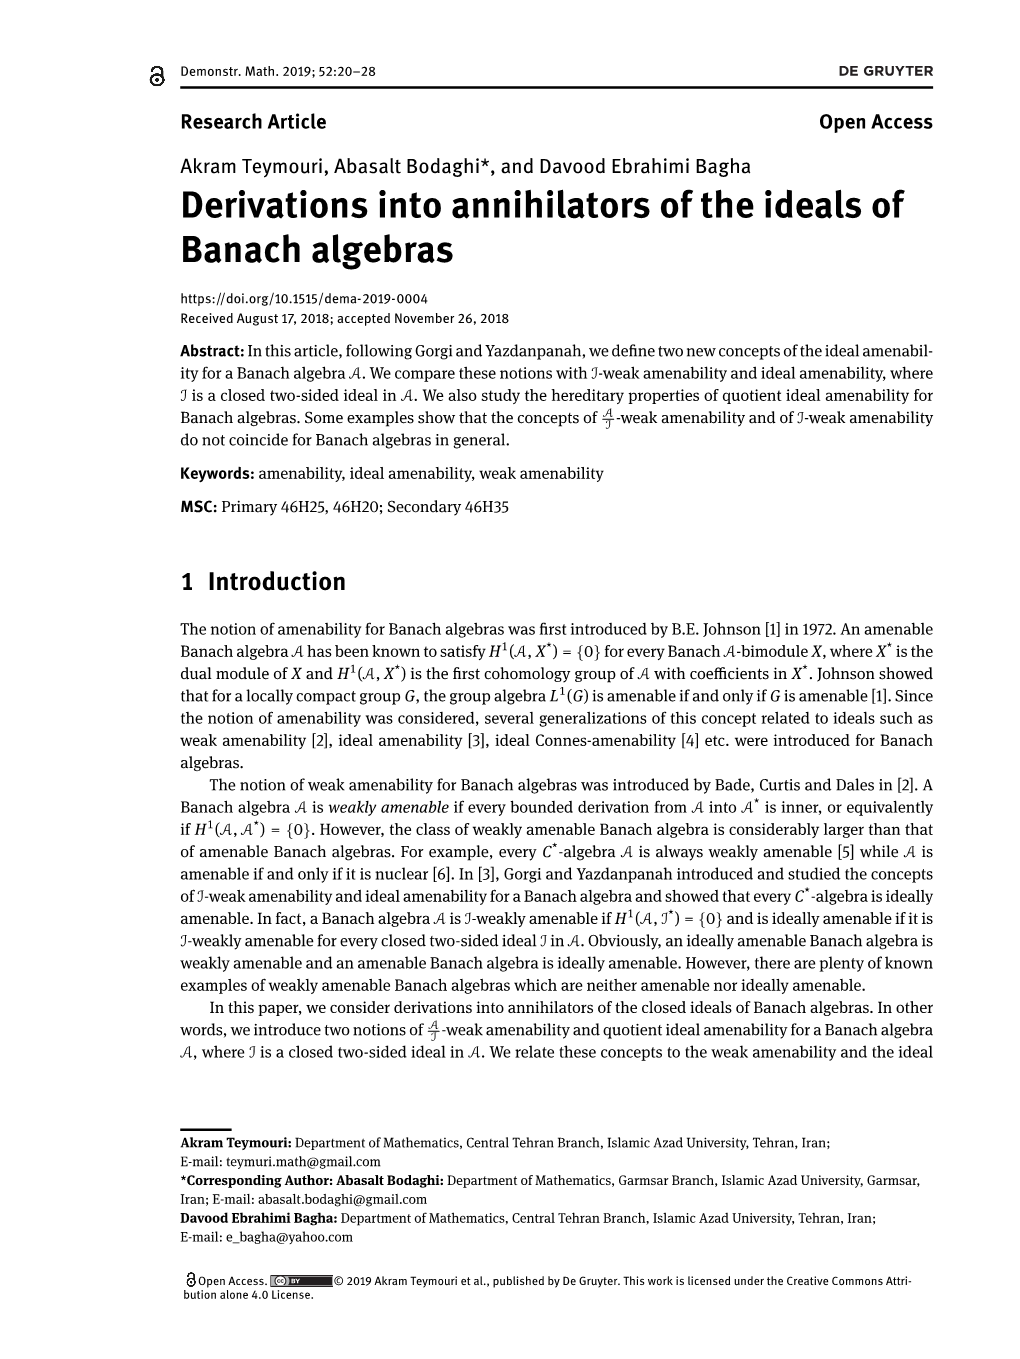 Derivations Into Annihilators of the Ideals of Banach Algebras Received August 17, 2018; Accepted November 26, 2018